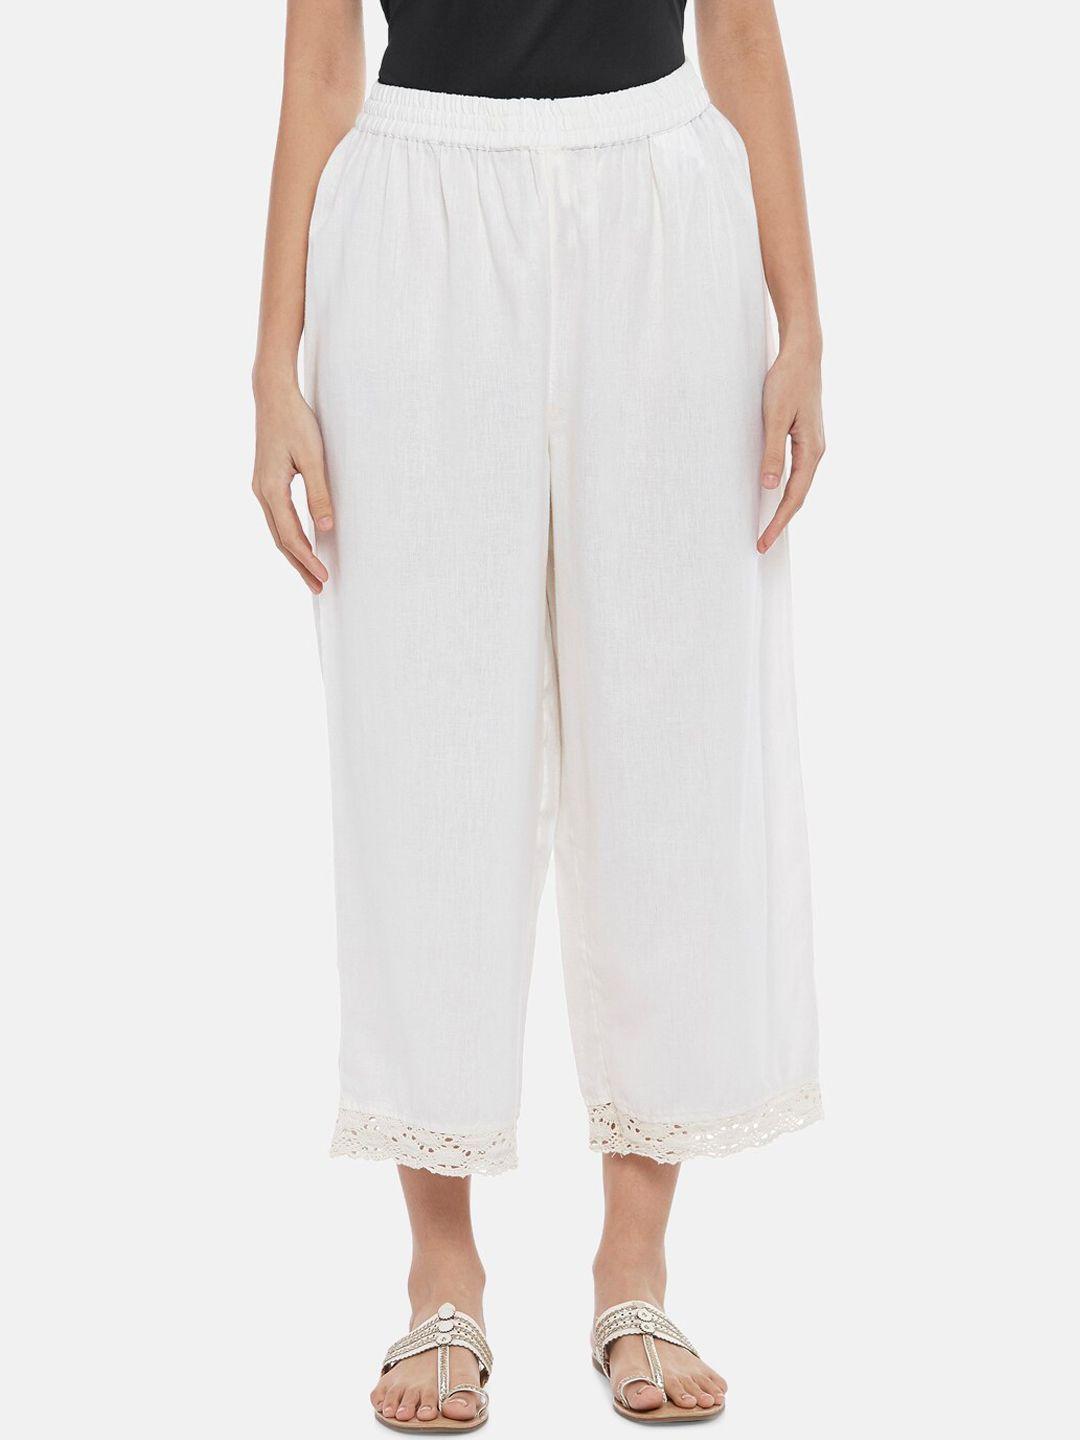 rangmanch-by-pantaloons-women-off-white-culottes-trousers